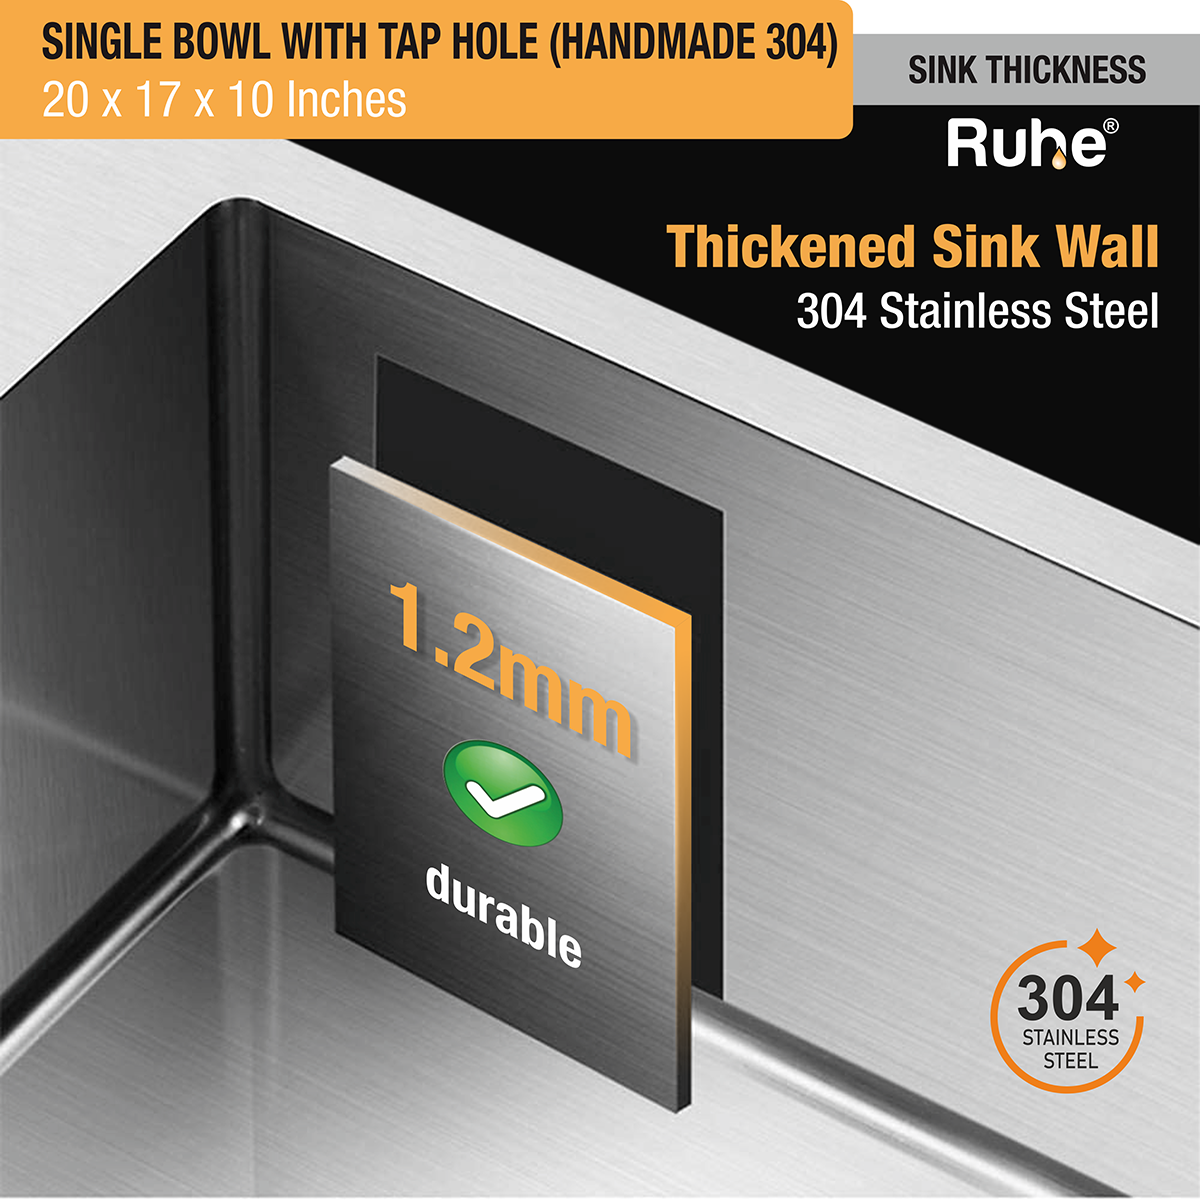 Handmade Single Bowl 304-Grade Kitchen Sink (20 x 17 x 10 Inches) with Tap Hole stainless steel thickness